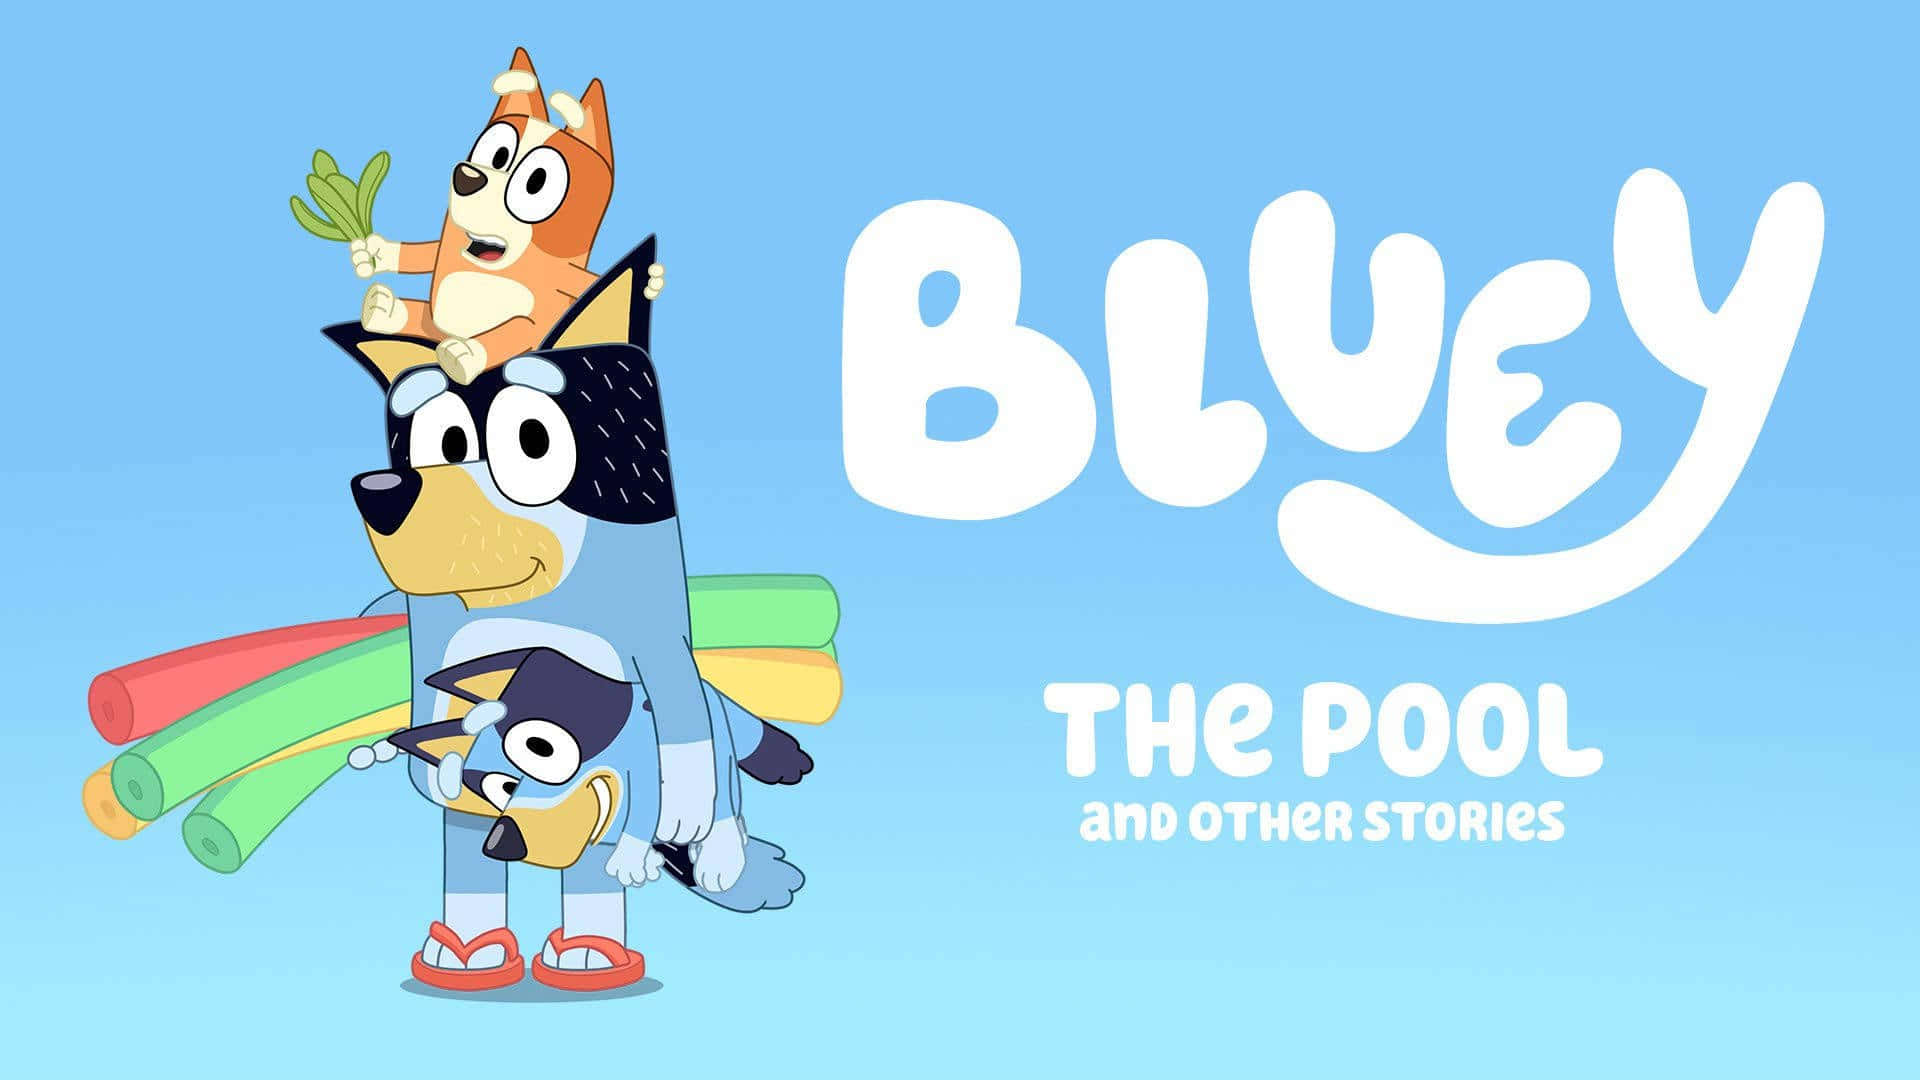 Bluey The Pool - October 2018